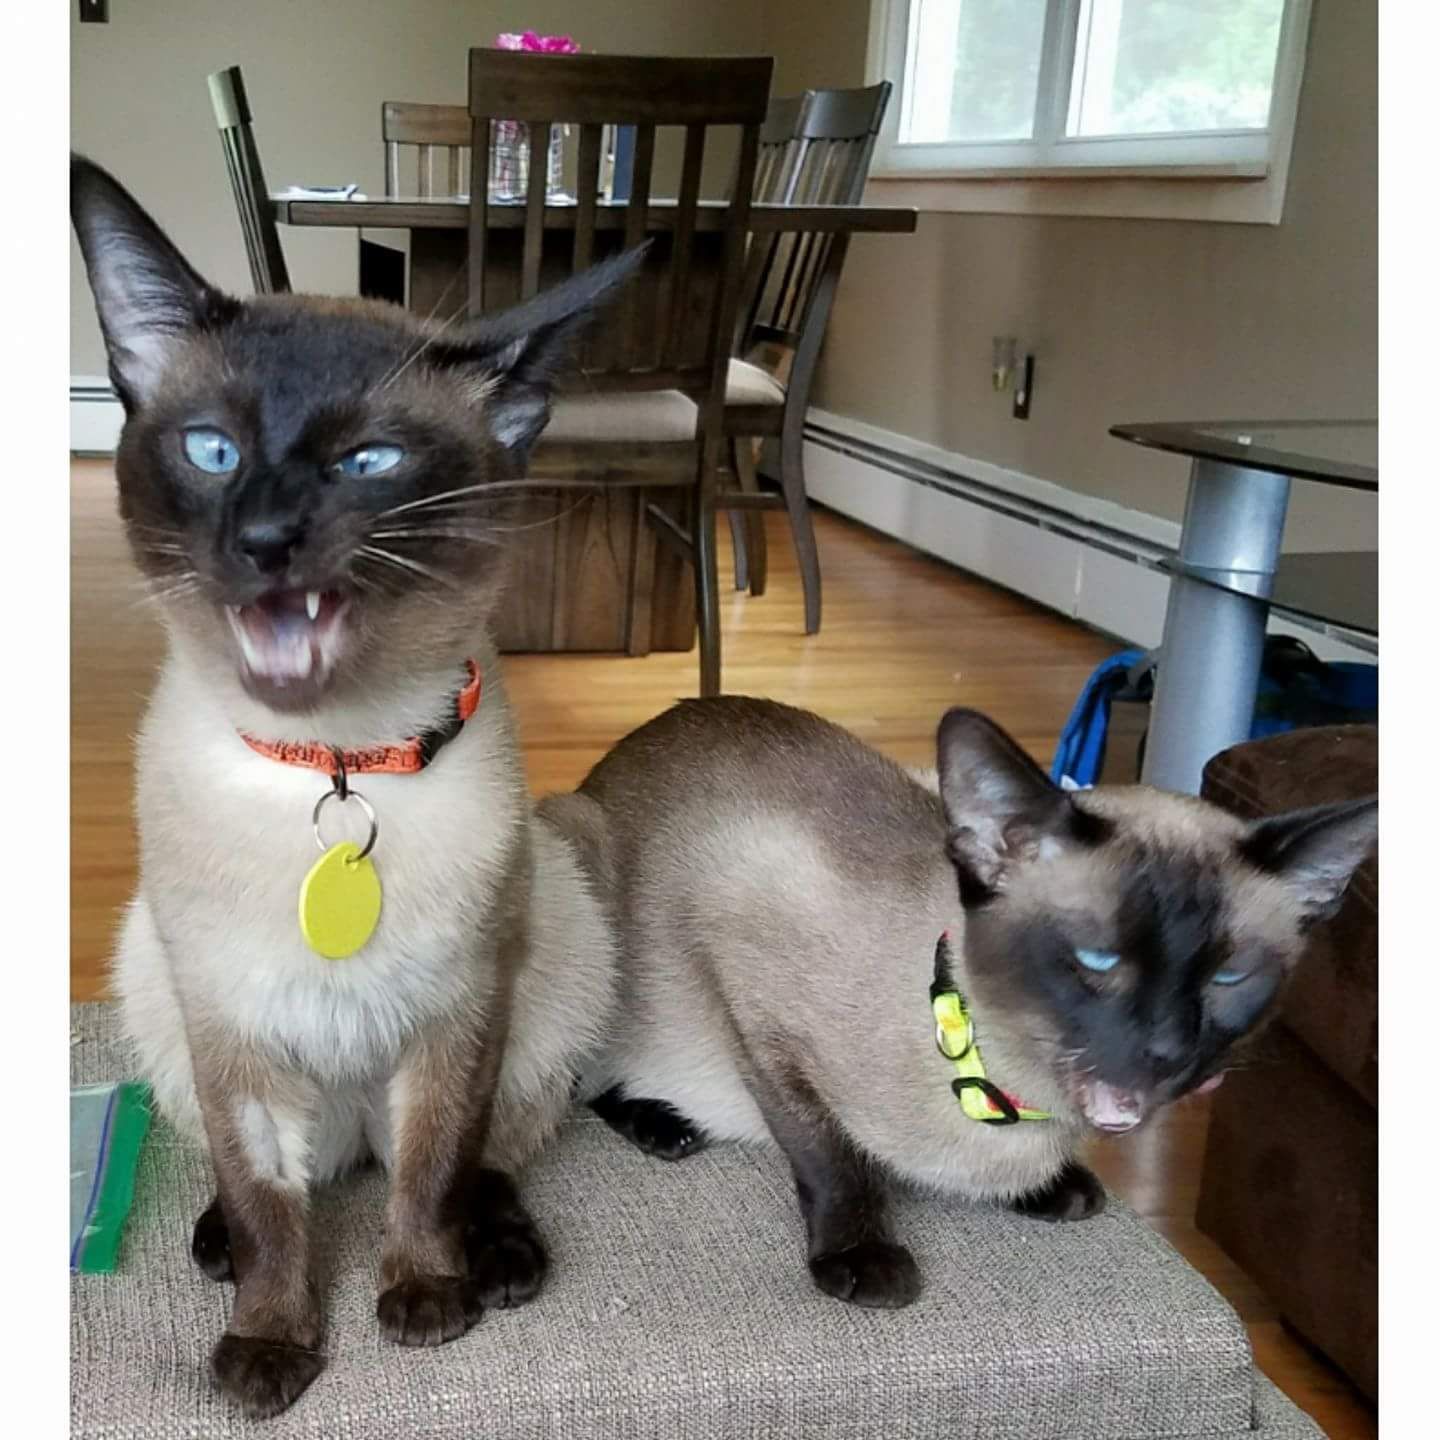 My sister's siamese cats derping while trying new treats.